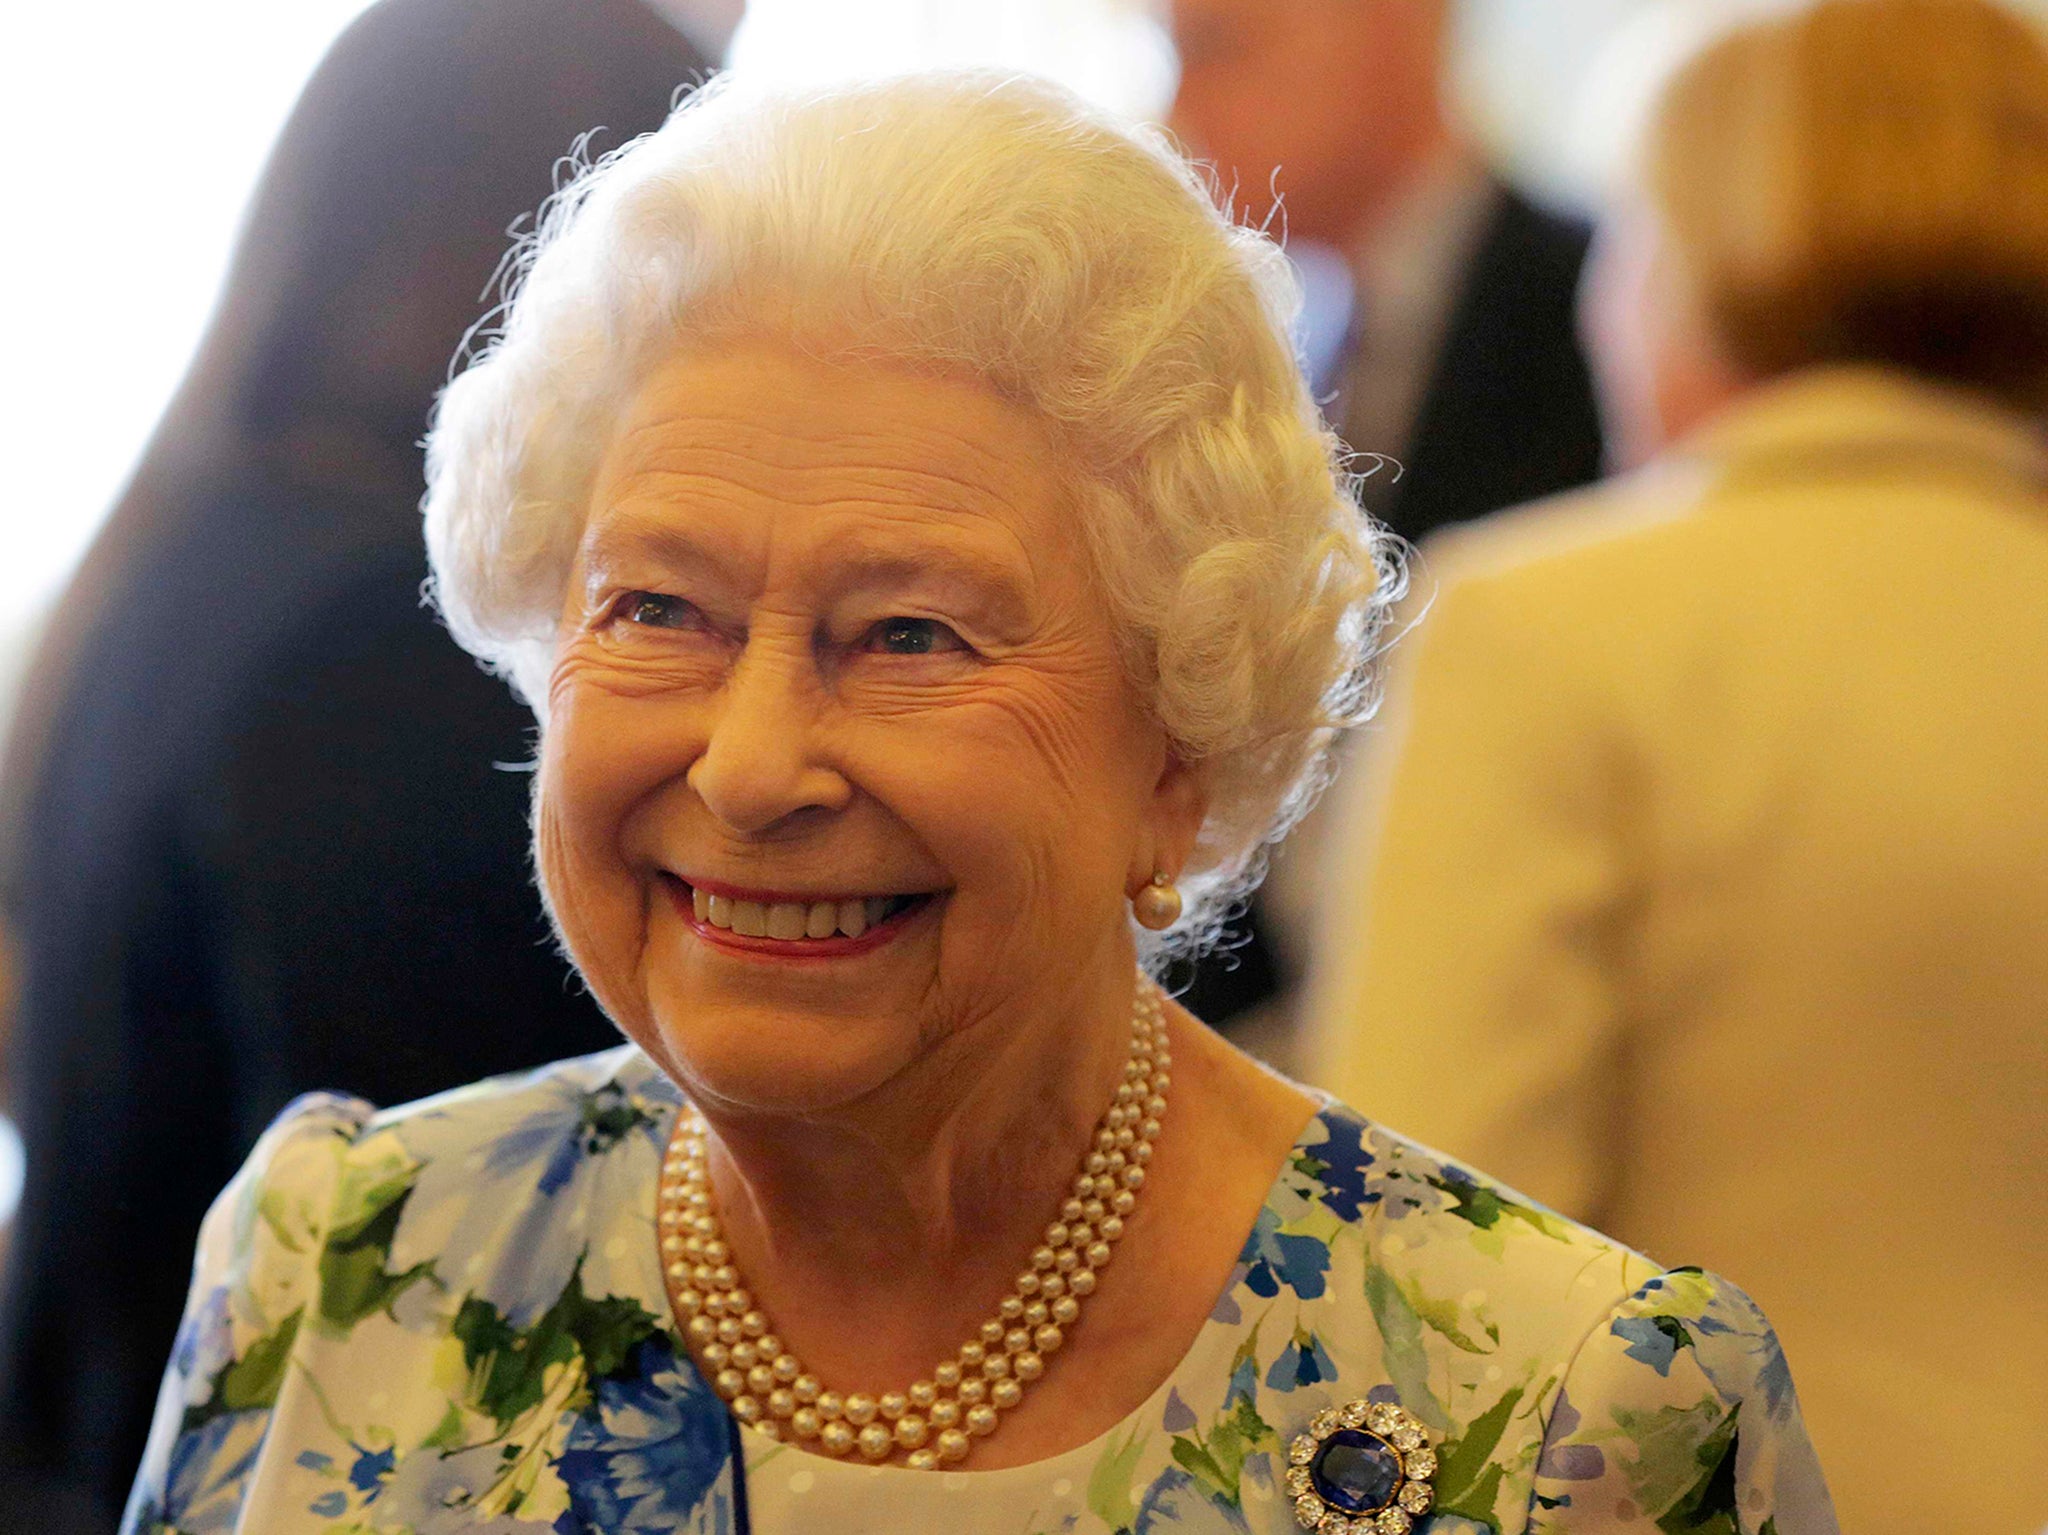 Queen Elizabeth II during a reception in Buckingham Palace, London, to mark her 90th birthday